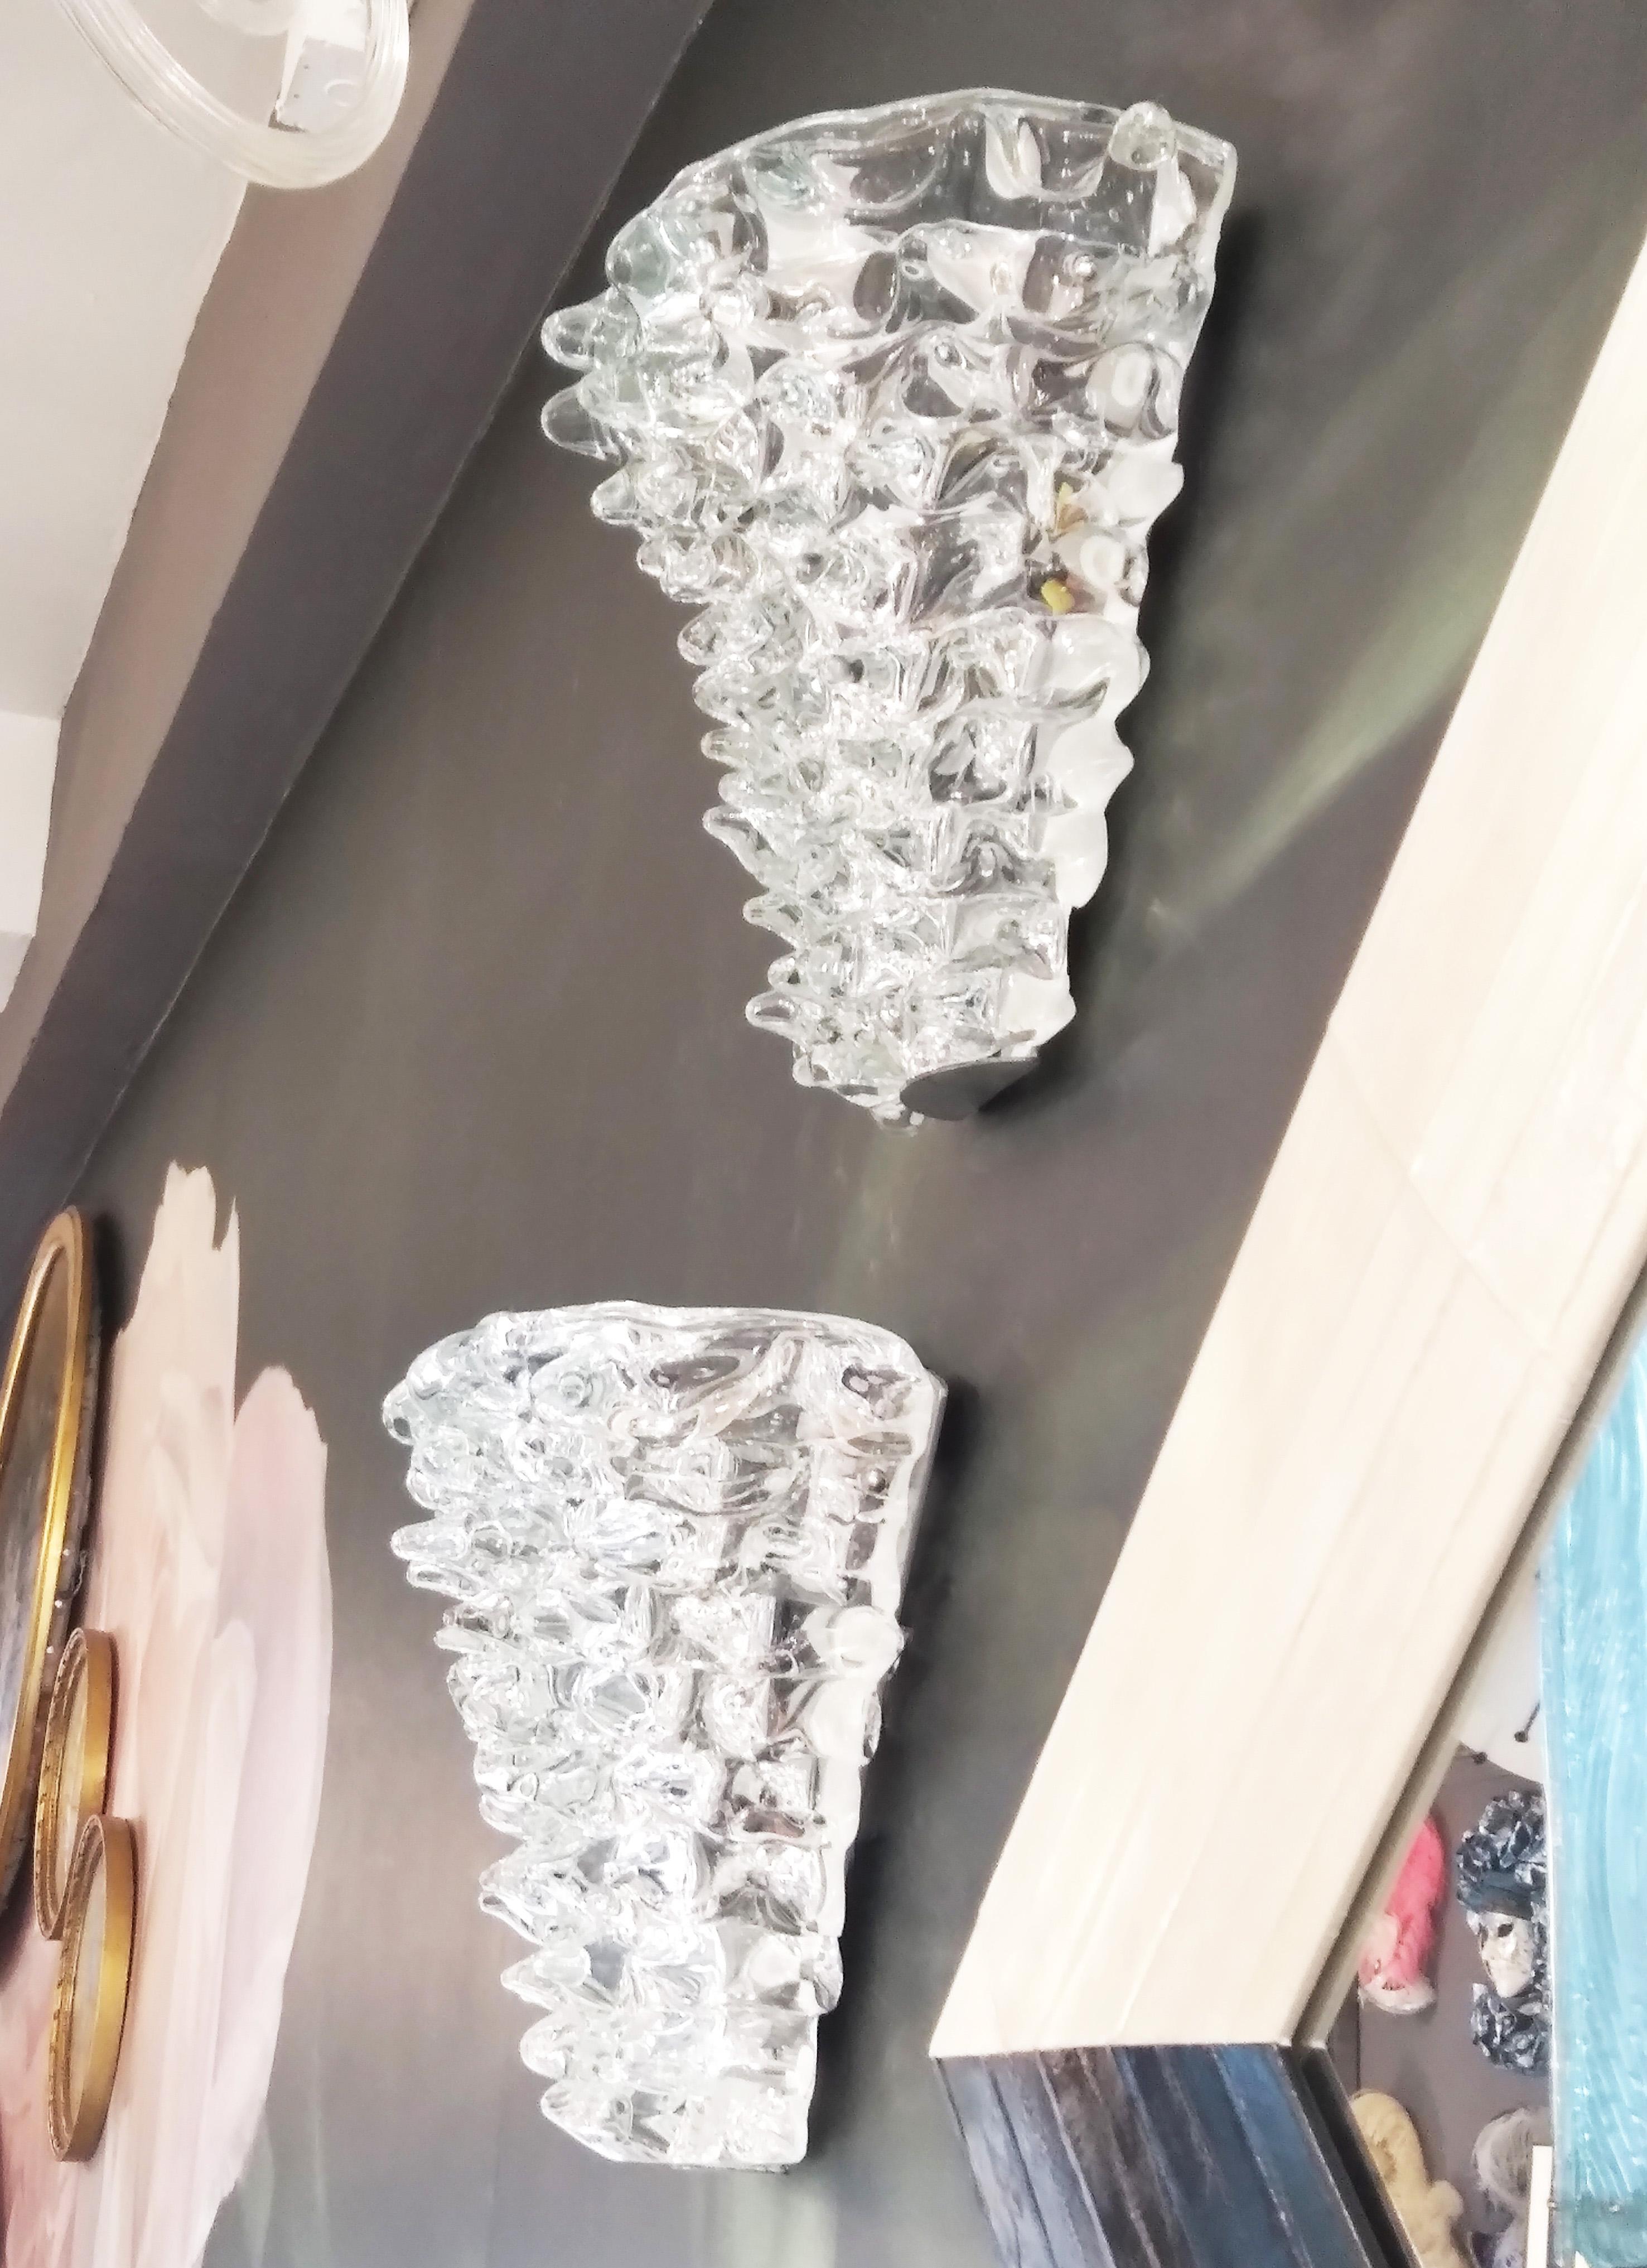 An extraordinary Venetian organic sculpture pair of crystal clear Murano glass modern wall lights by Barovier Toso, with a cone shape, realized using the Rostrato technique that Barovier Toso revived with exceptional skill and success, as